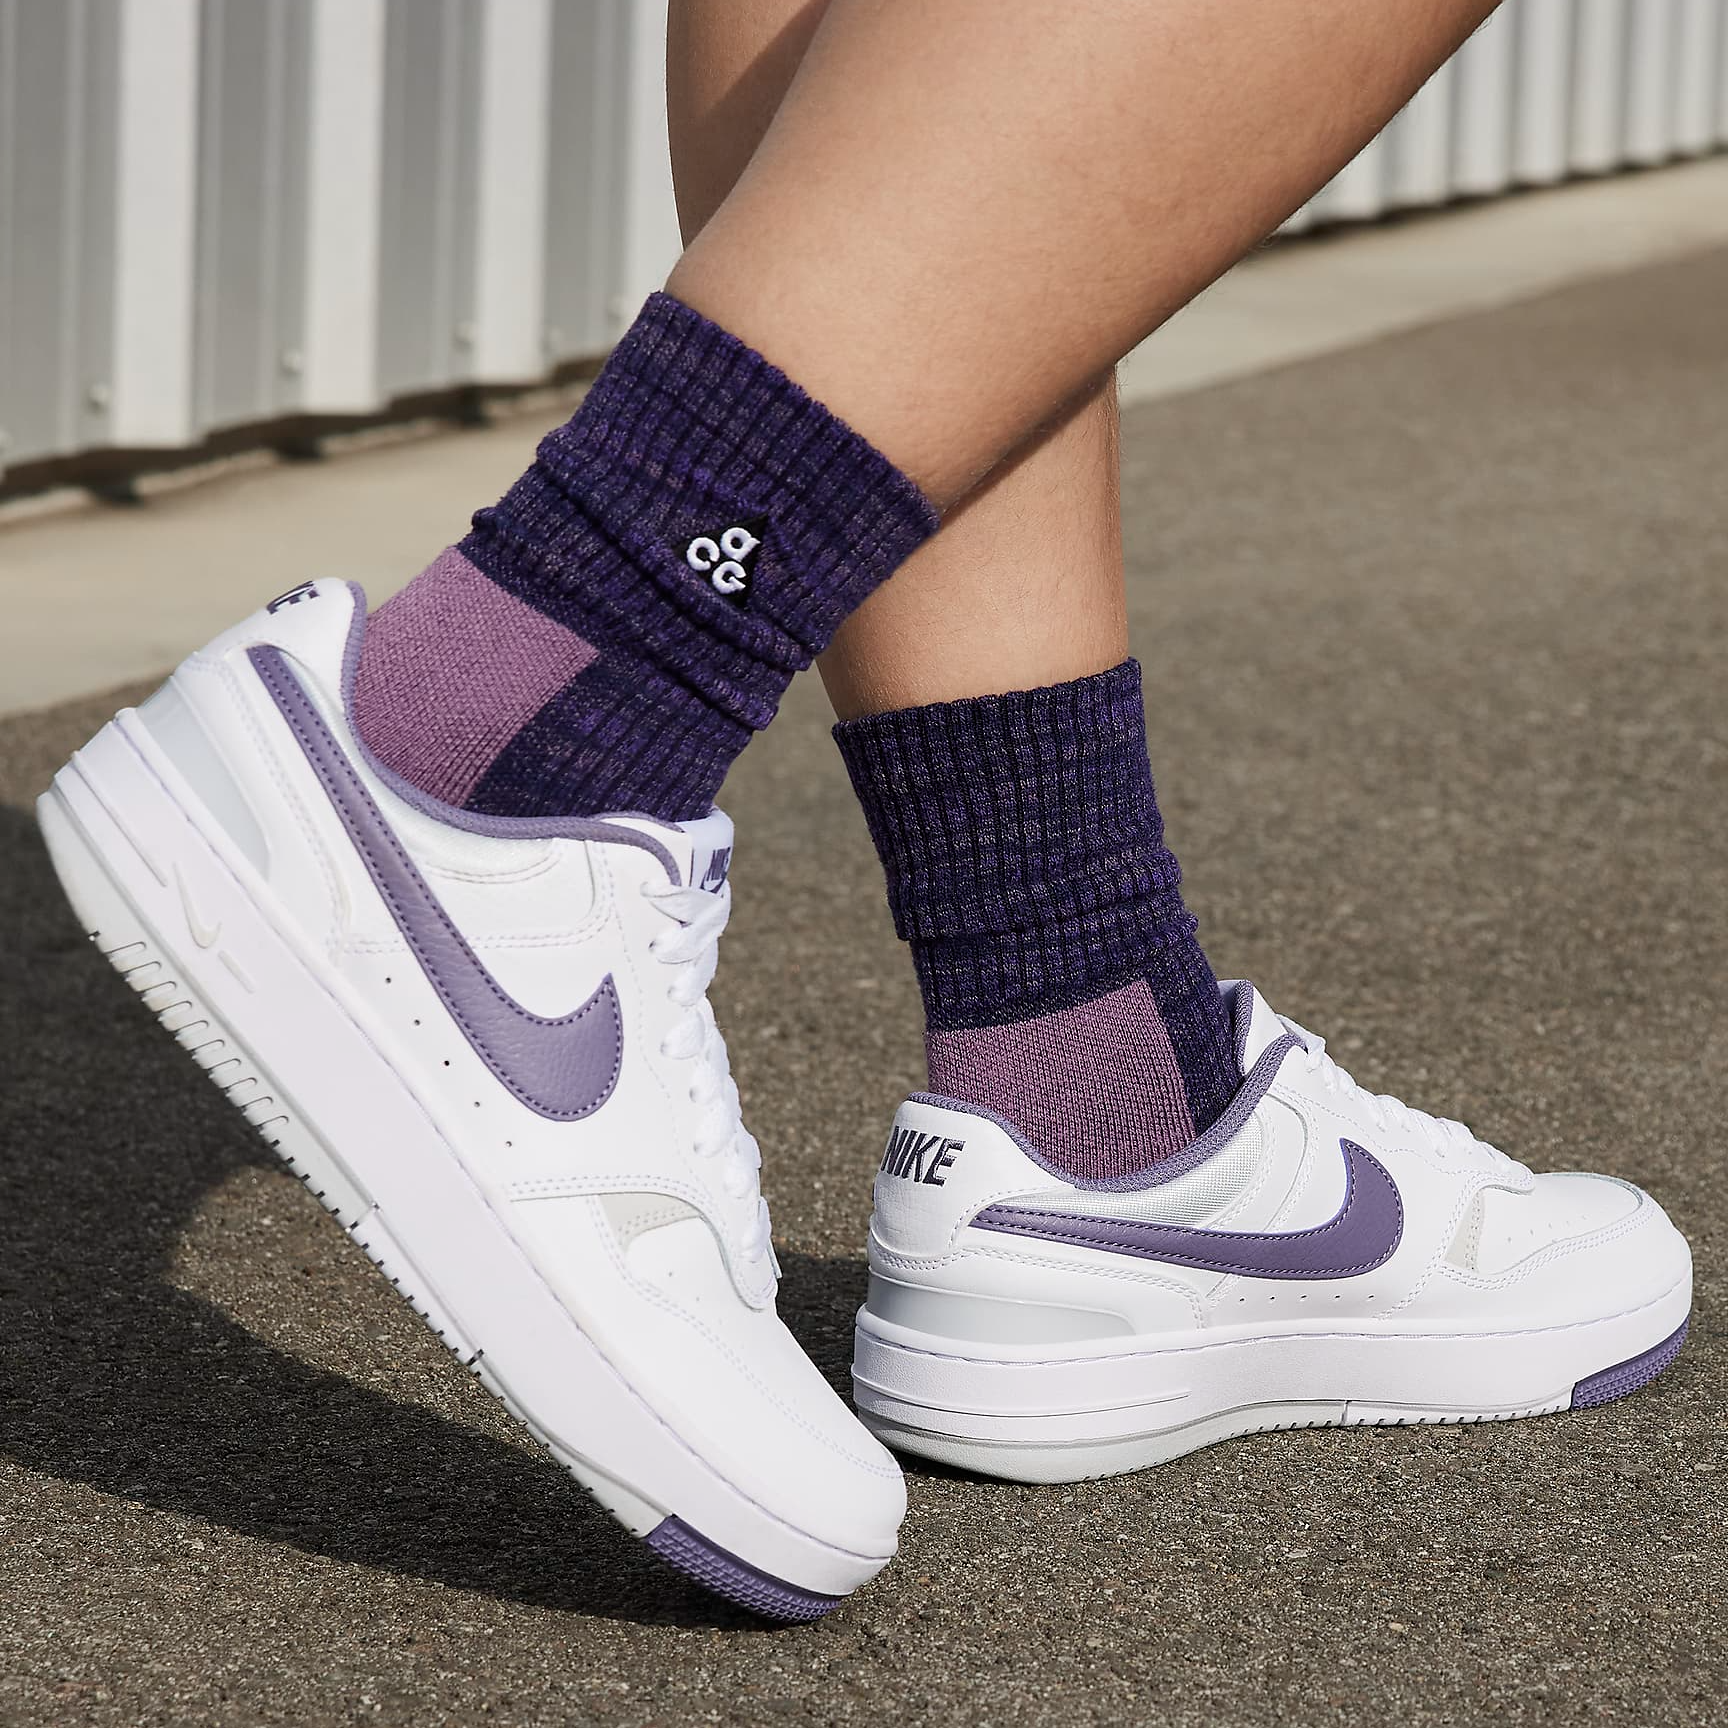 A pair of white Nike sneakers with purple accents and matching purple crew socks.